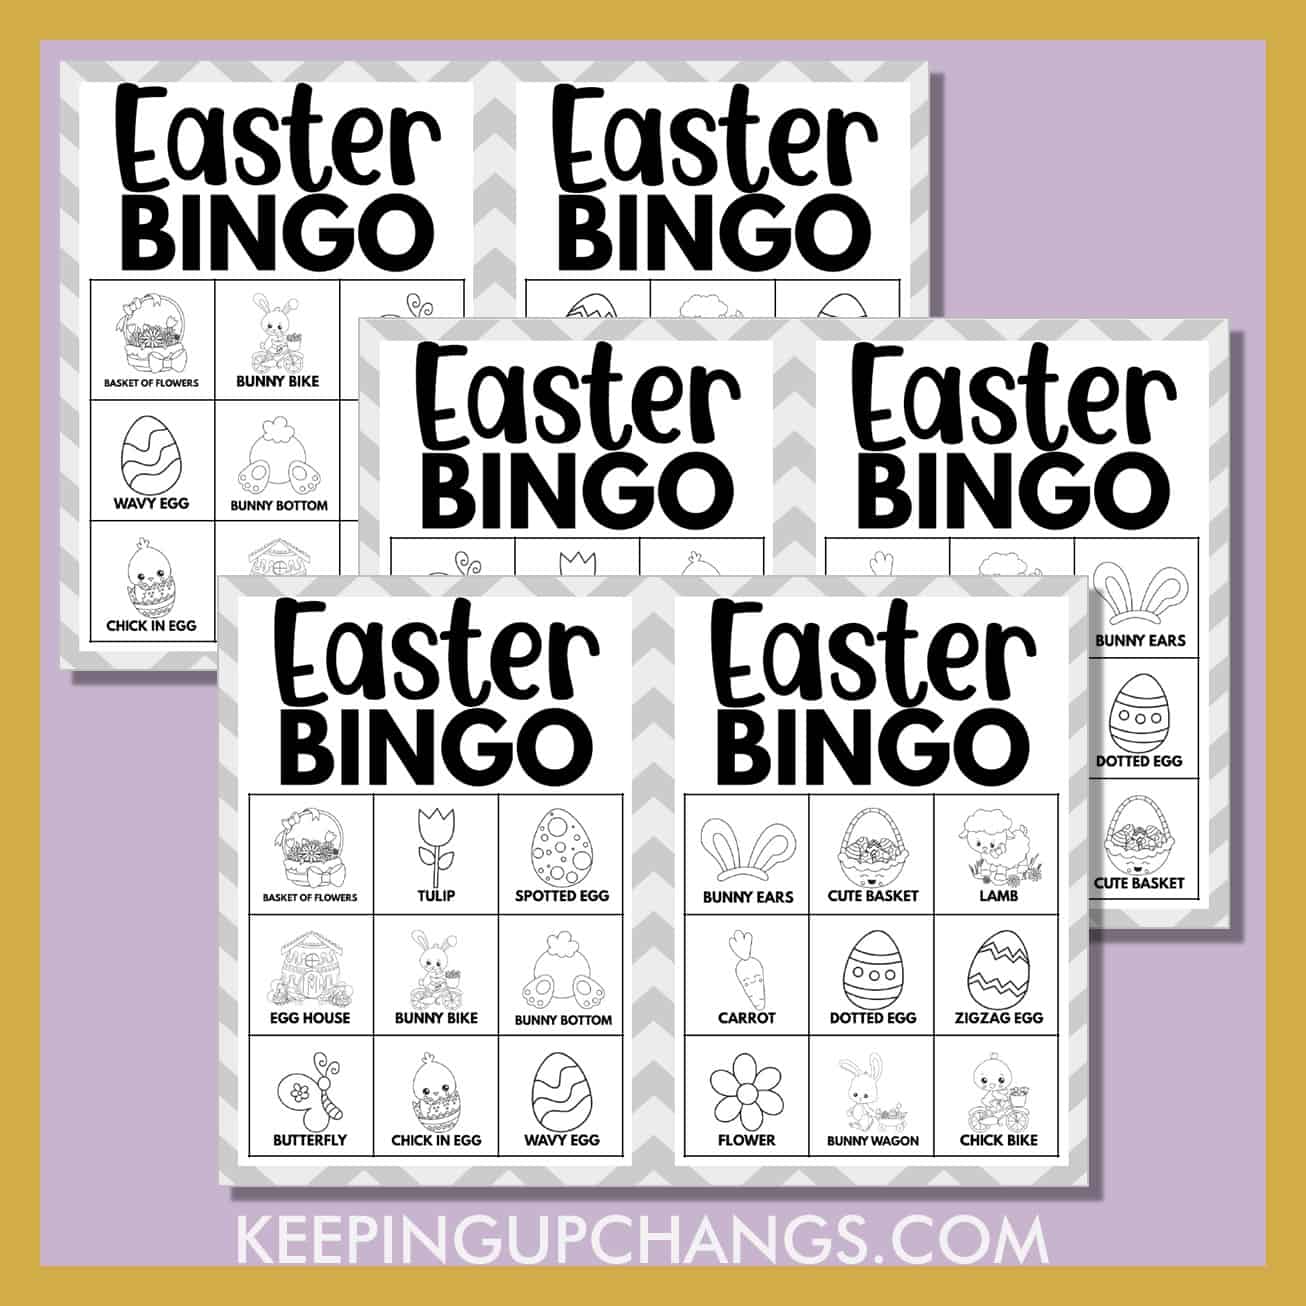 free easter bingo cards 3x3 black white coloring for party, school, group.